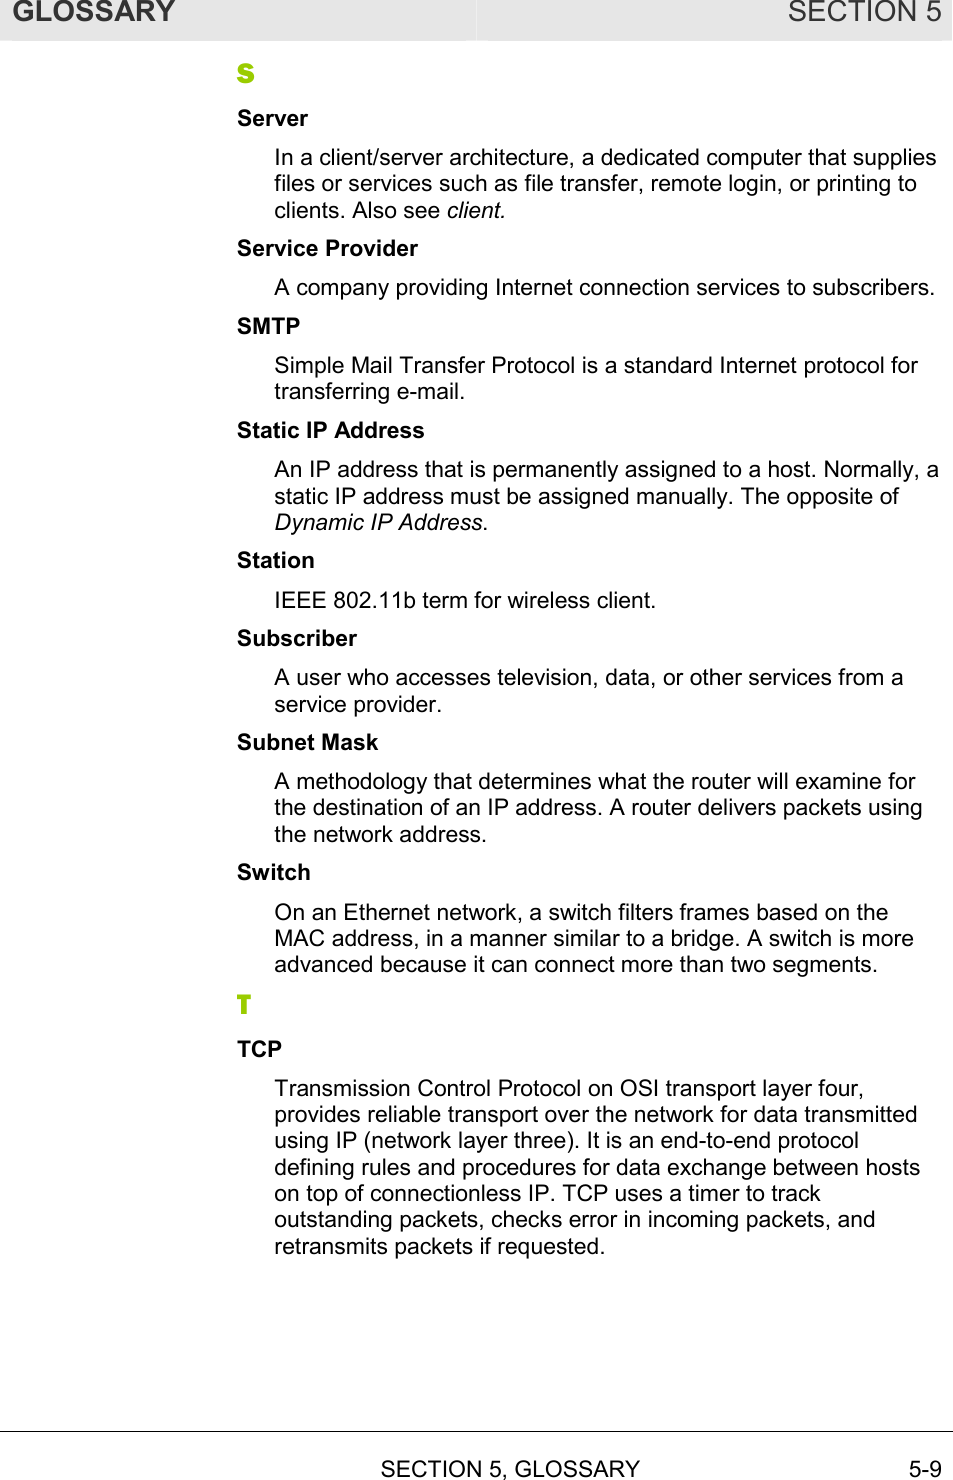 GLOSSARY SECTION 5  SECTION 5, GLOSSARY 5-9 S Server In a client/server architecture, a dedicated computer that supplies files or services such as file transfer, remote login, or printing to clients. Also see client. Service Provider A company providing Internet connection services to subscribers. SMTP Simple Mail Transfer Protocol is a standard Internet protocol for transferring e-mail. Static IP Address An IP address that is permanently assigned to a host. Normally, a static IP address must be assigned manually. The opposite of Dynamic IP Address. Station IEEE 802.11b term for wireless client. Subscriber A user who accesses television, data, or other services from a service provider. Subnet Mask A methodology that determines what the router will examine for the destination of an IP address. A router delivers packets using the network address. Switch On an Ethernet network, a switch filters frames based on the MAC address, in a manner similar to a bridge. A switch is more advanced because it can connect more than two segments. T TCP Transmission Control Protocol on OSI transport layer four, provides reliable transport over the network for data transmitted using IP (network layer three). It is an end-to-end protocol defining rules and procedures for data exchange between hosts on top of connectionless IP. TCP uses a timer to track outstanding packets, checks error in incoming packets, and retransmits packets if requested. 